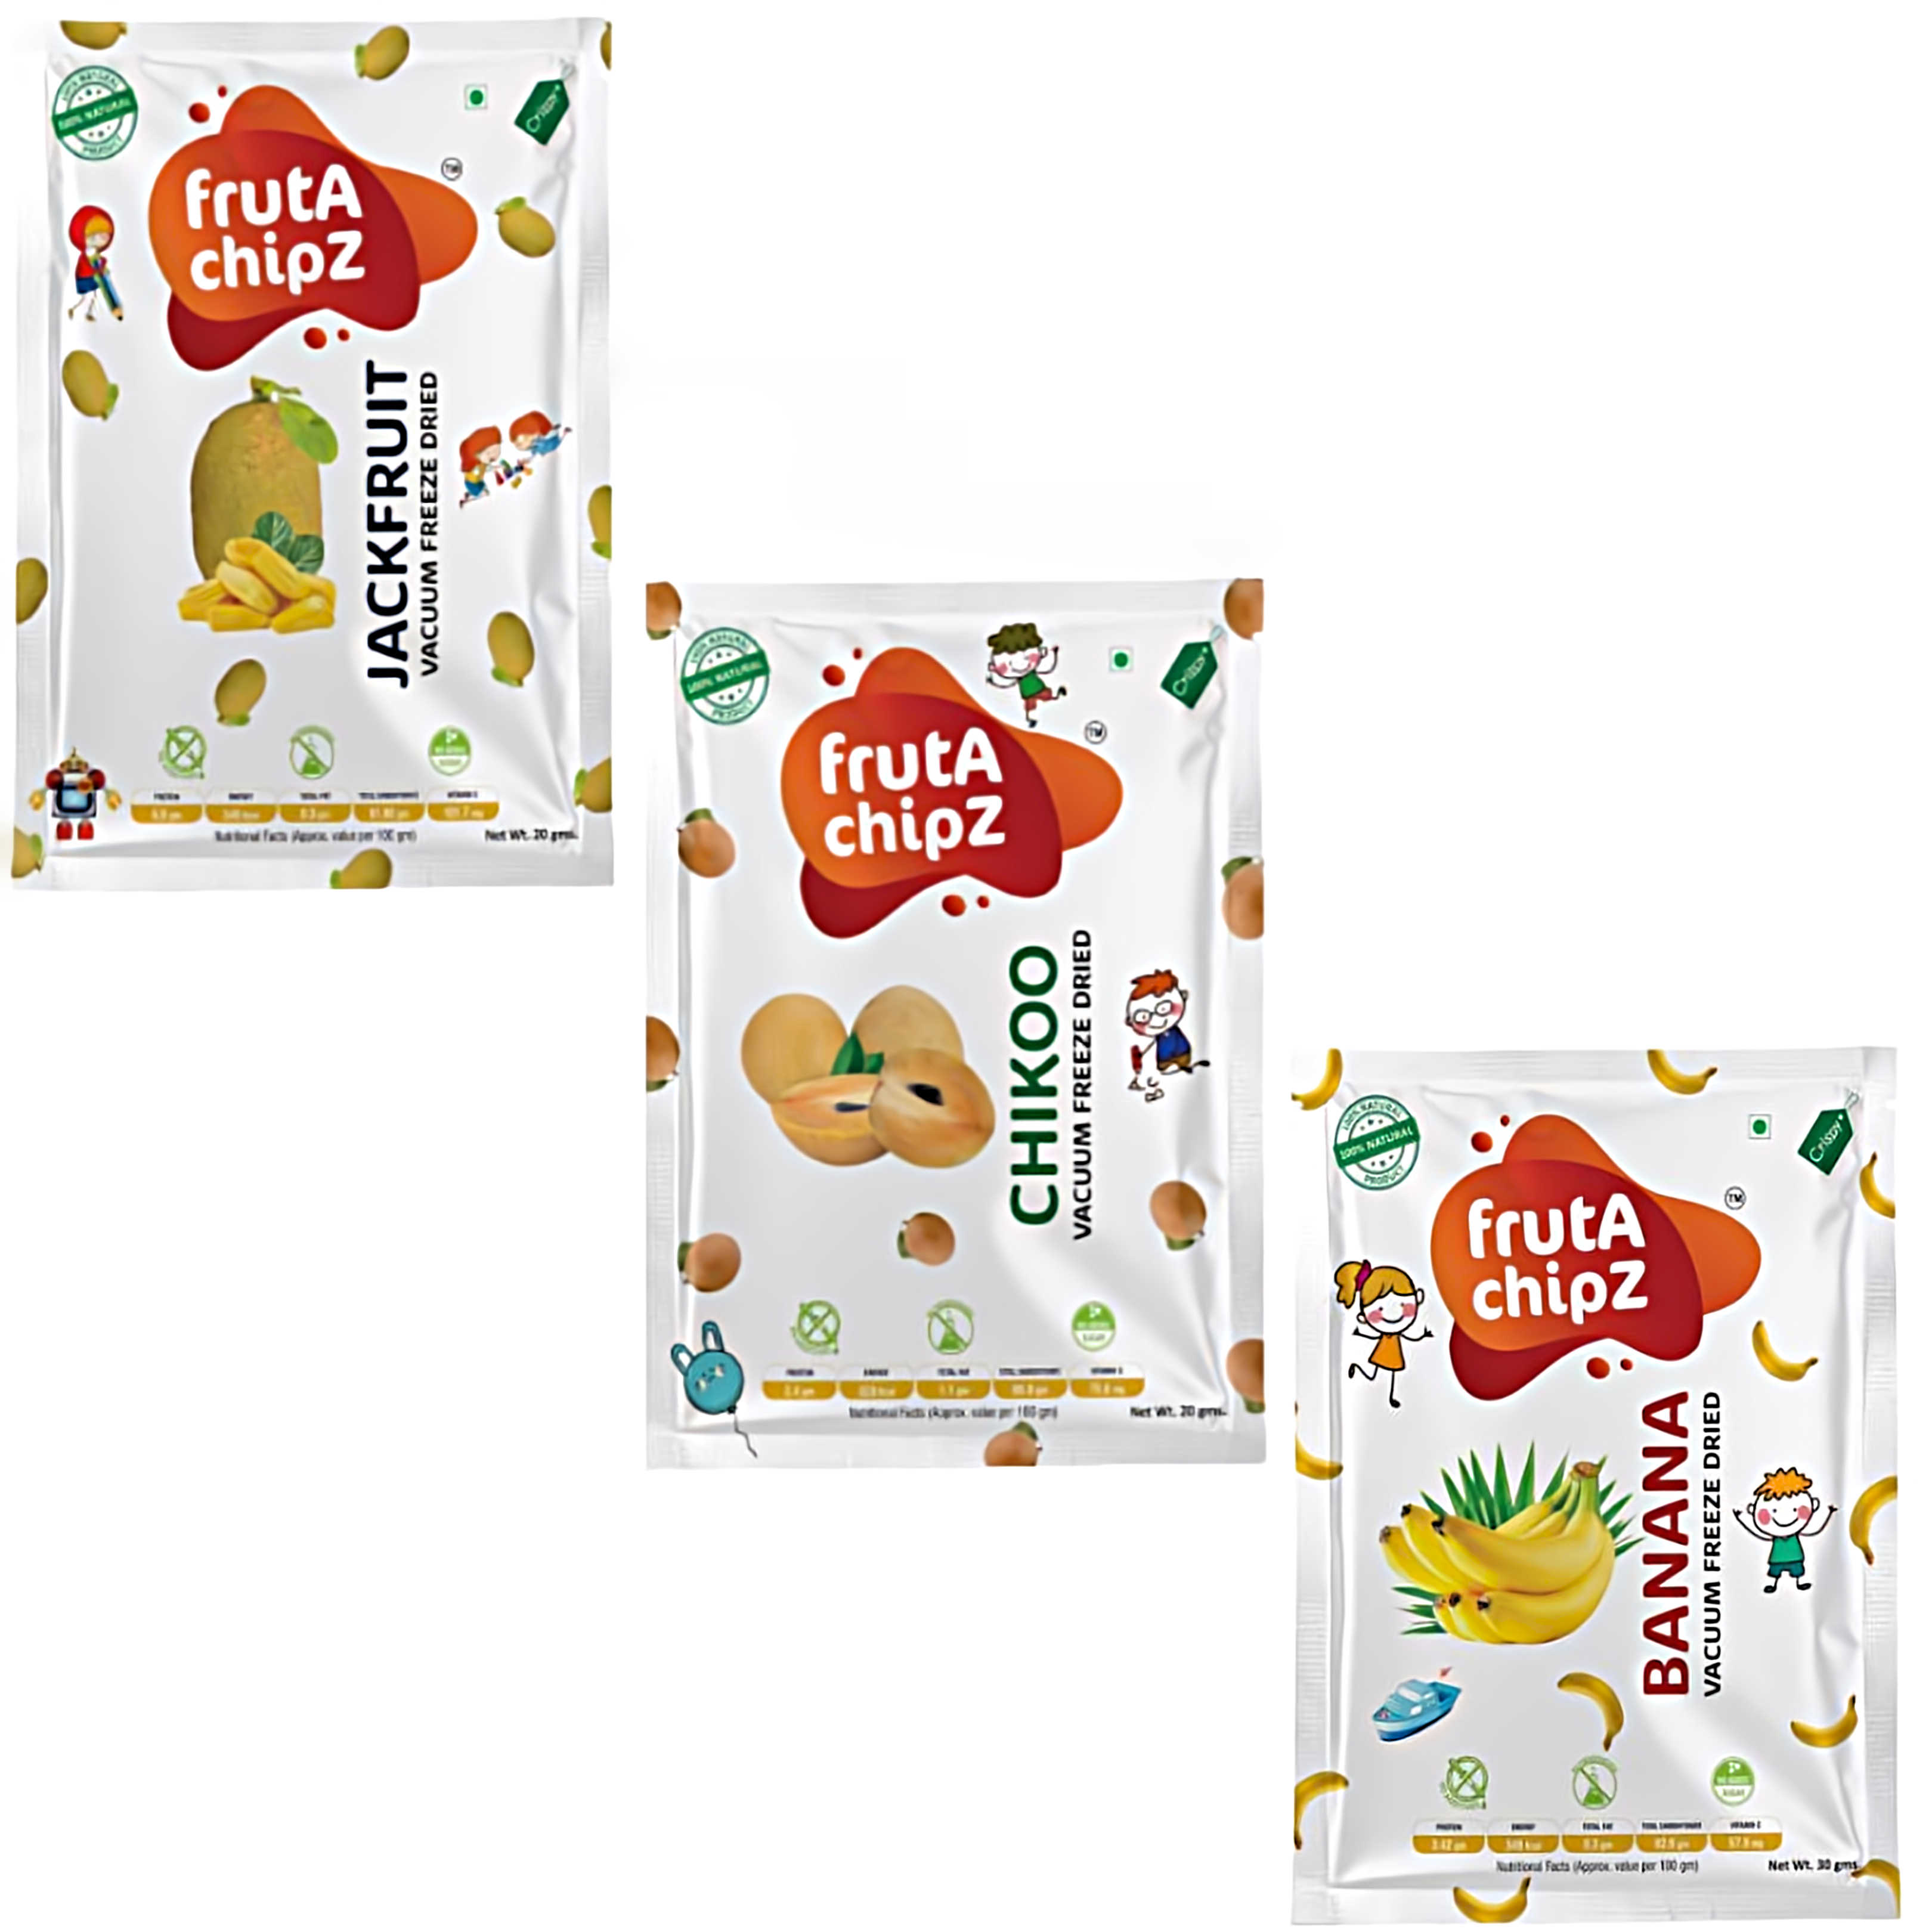 frutA chipZ Freeze Dried Banana 30 Gms/Chikoo 20 Gms/Jackfruit 20 Gms | 100% Natural | Healthy Fruit Chips| Ready to Eat | Crunchy |